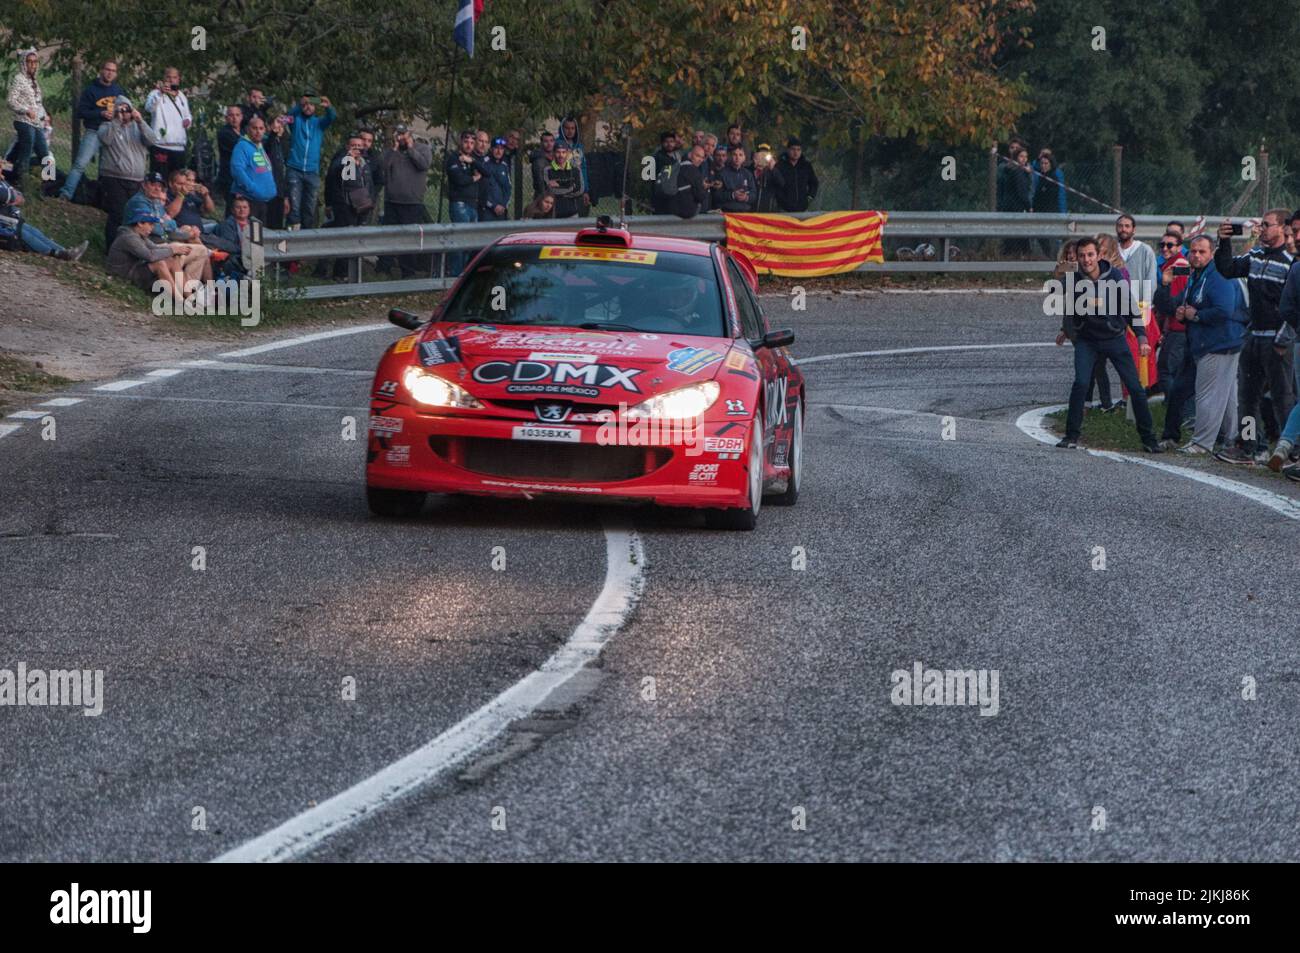 A vintage car Peugeot in race. San Marino Stock Photo